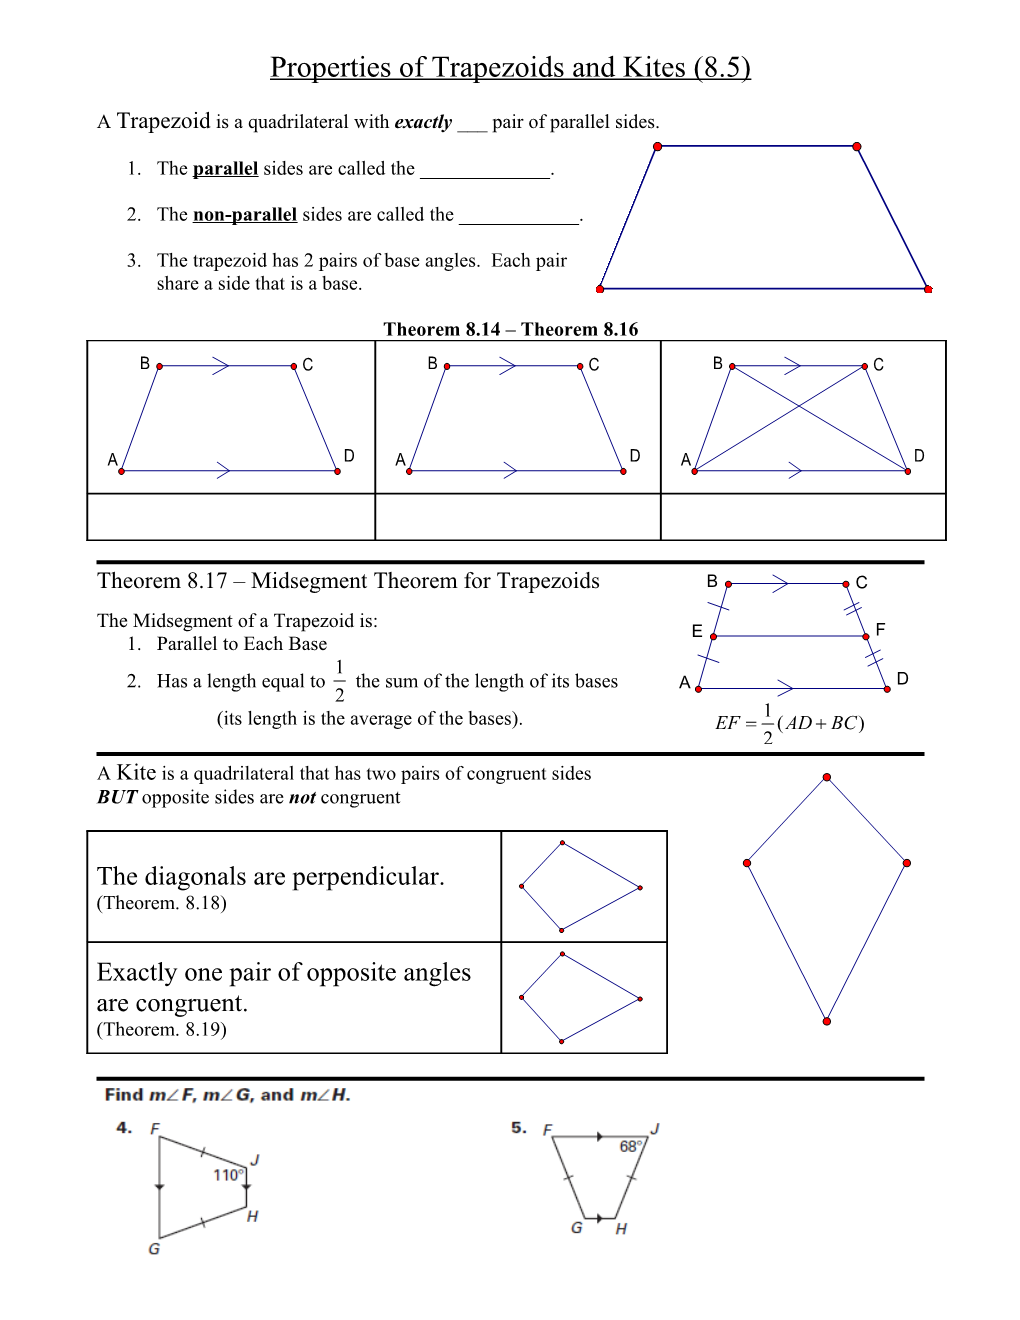 Properties of Trapezoids and Kites (8